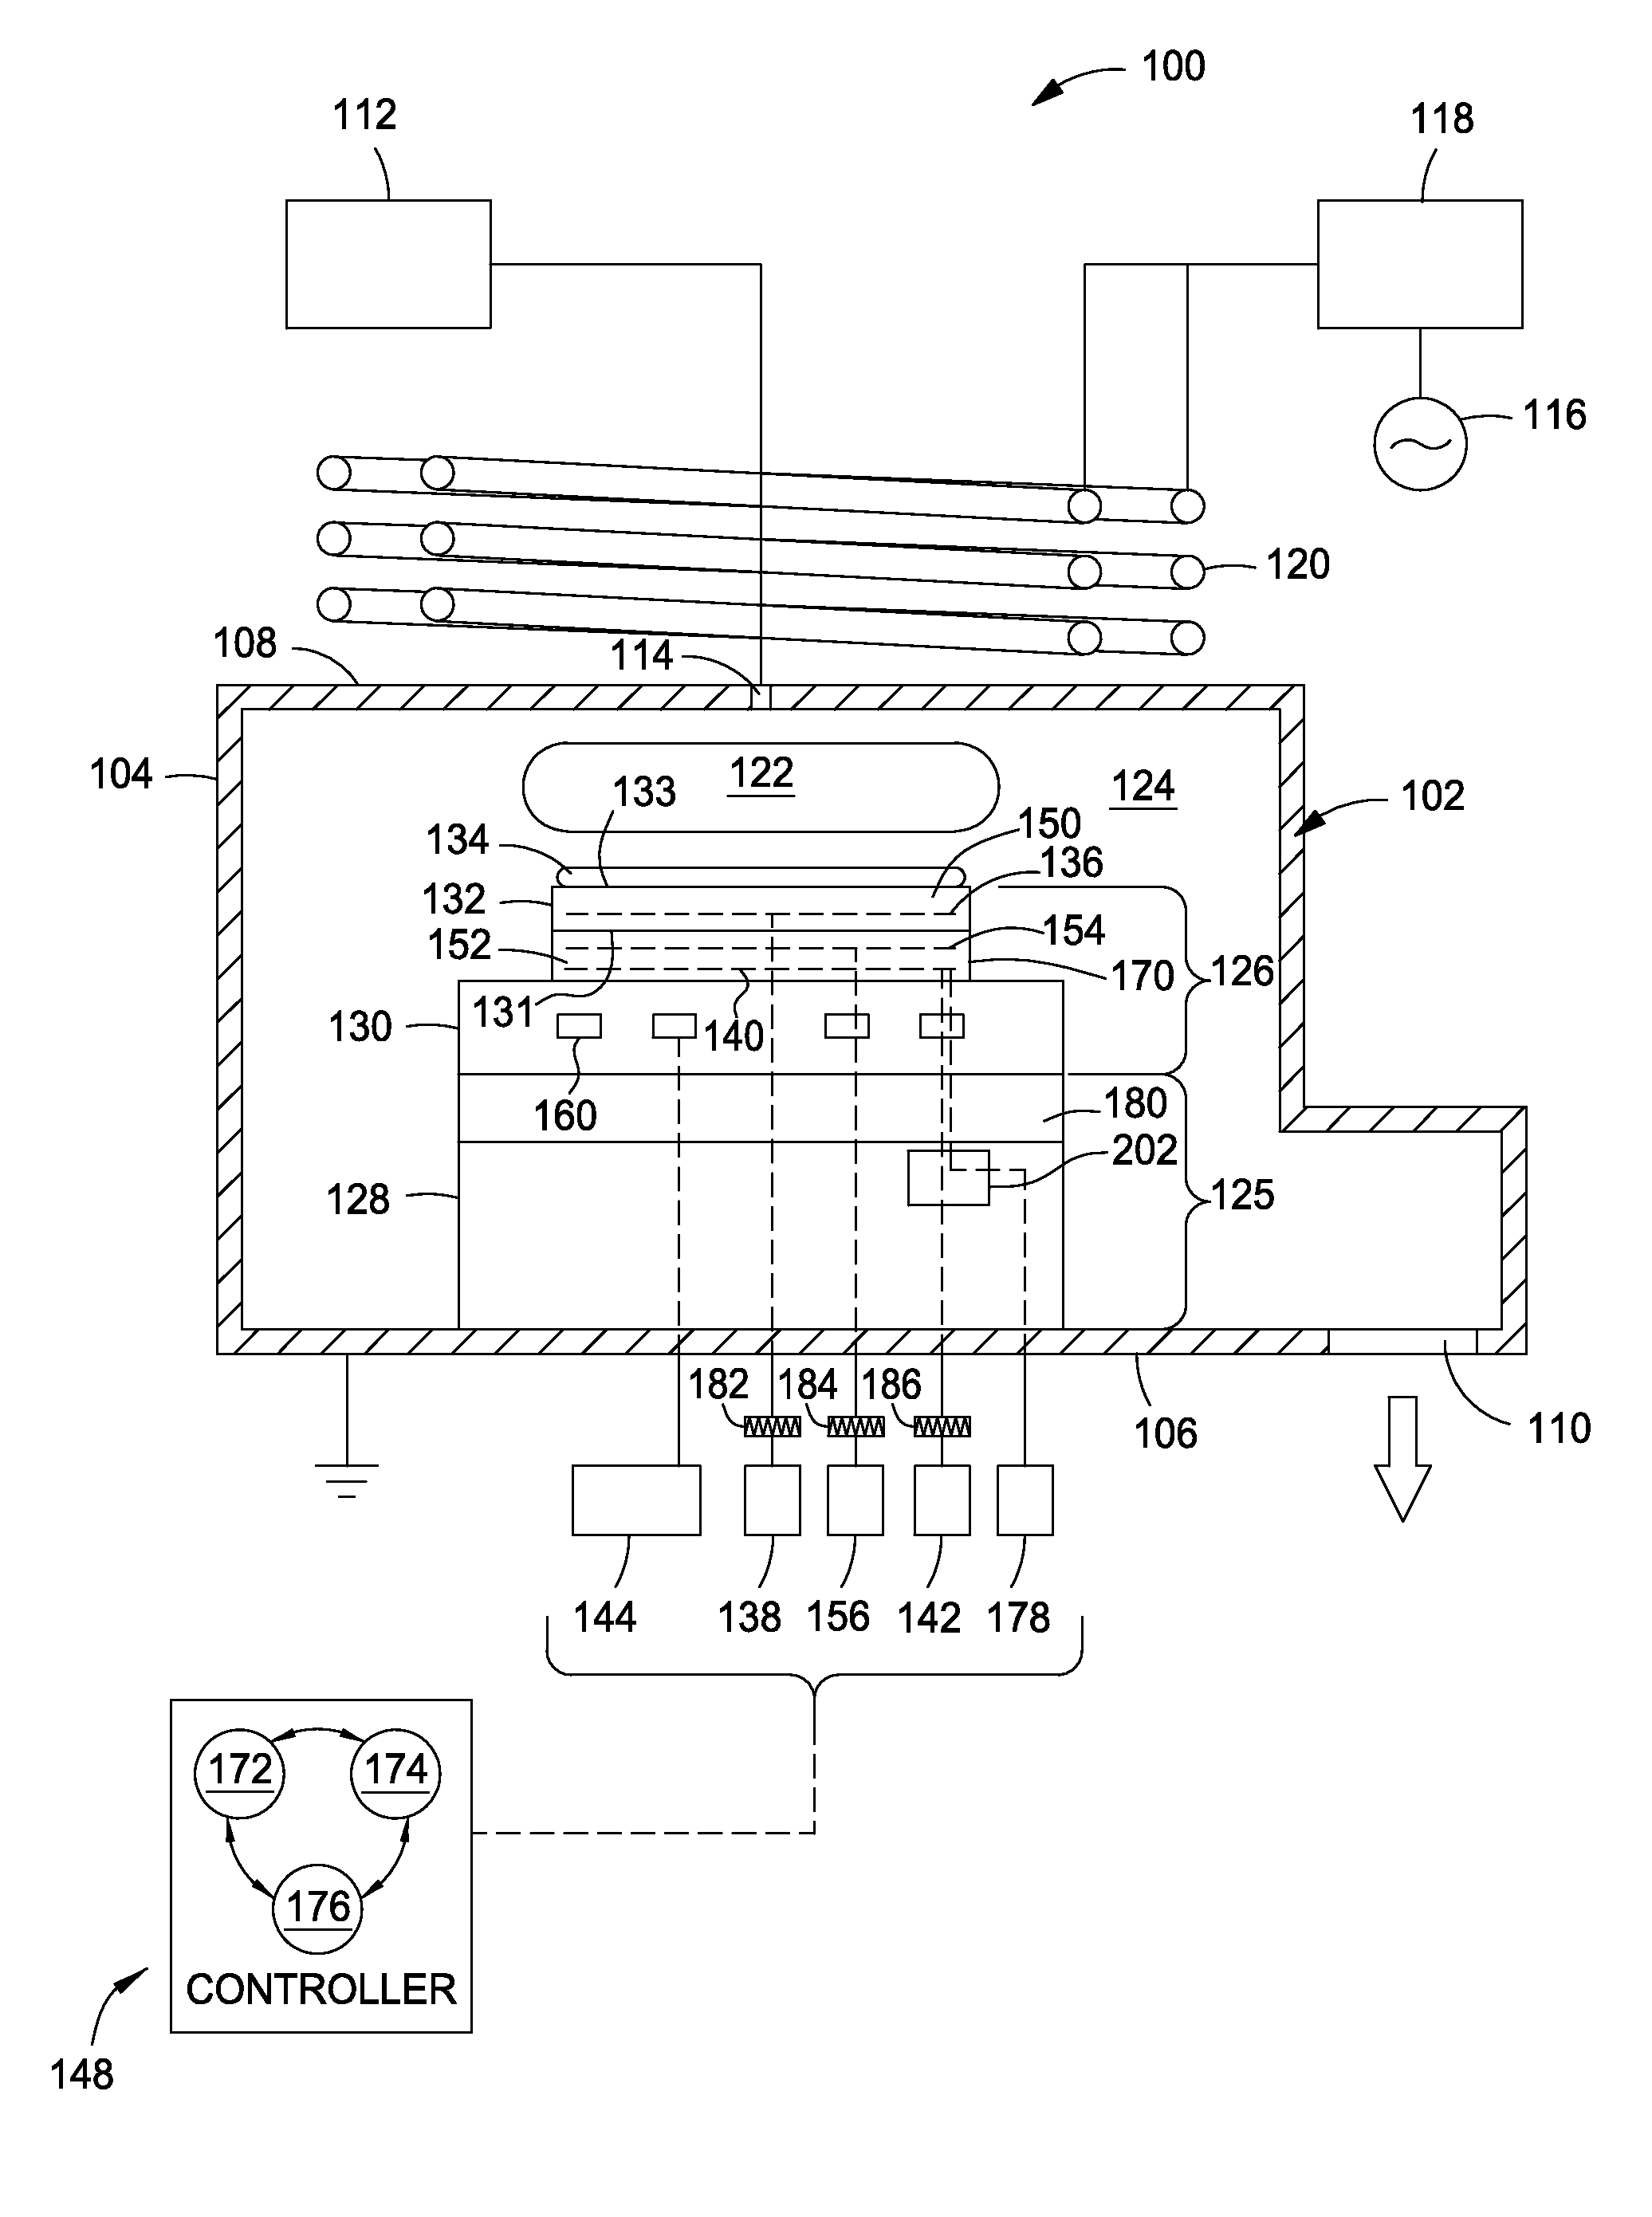 Pixilated temperature controlled substrate support assembly